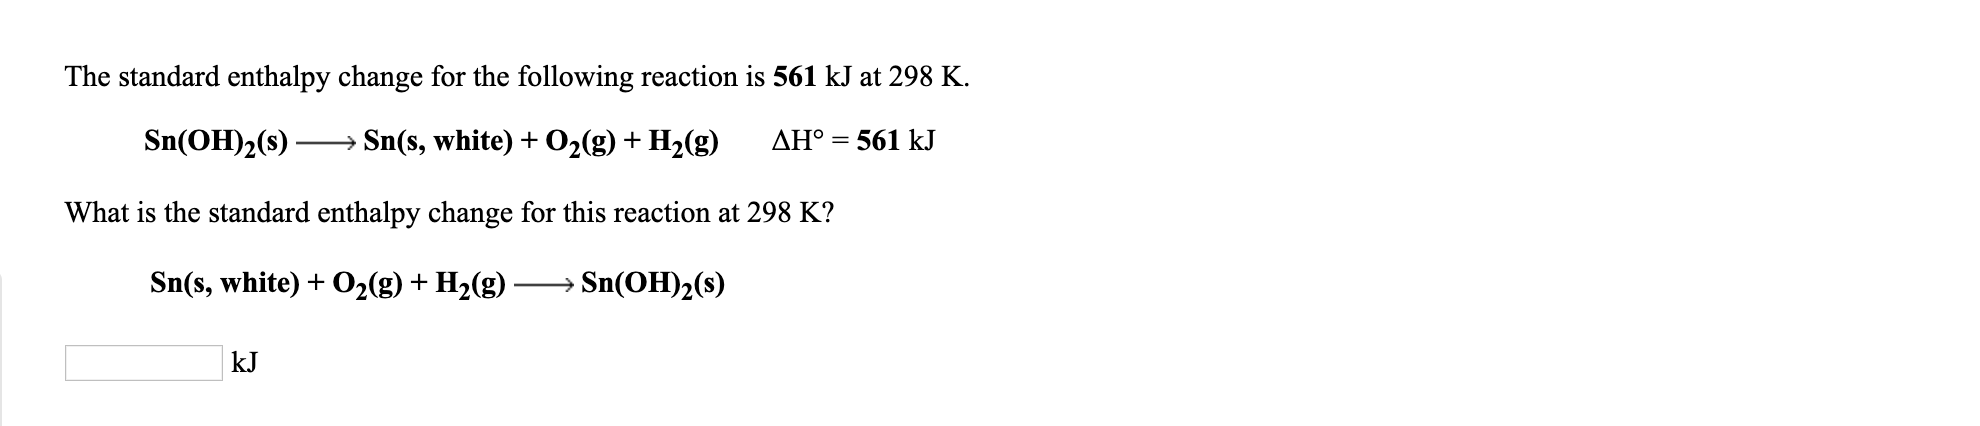 The standard enthalpy change for the following reaction is 561 kJ at 298 K.
Sn(OH)2(s) → Sn(s, white) + O2(g) + H2(g) AH° = 561 kJ
What is the standard enthalpy change for this reaction at 298 K?
Sn(s, white) + O,(g) + H,(g) → Sn(OH)2(s)
kJ
